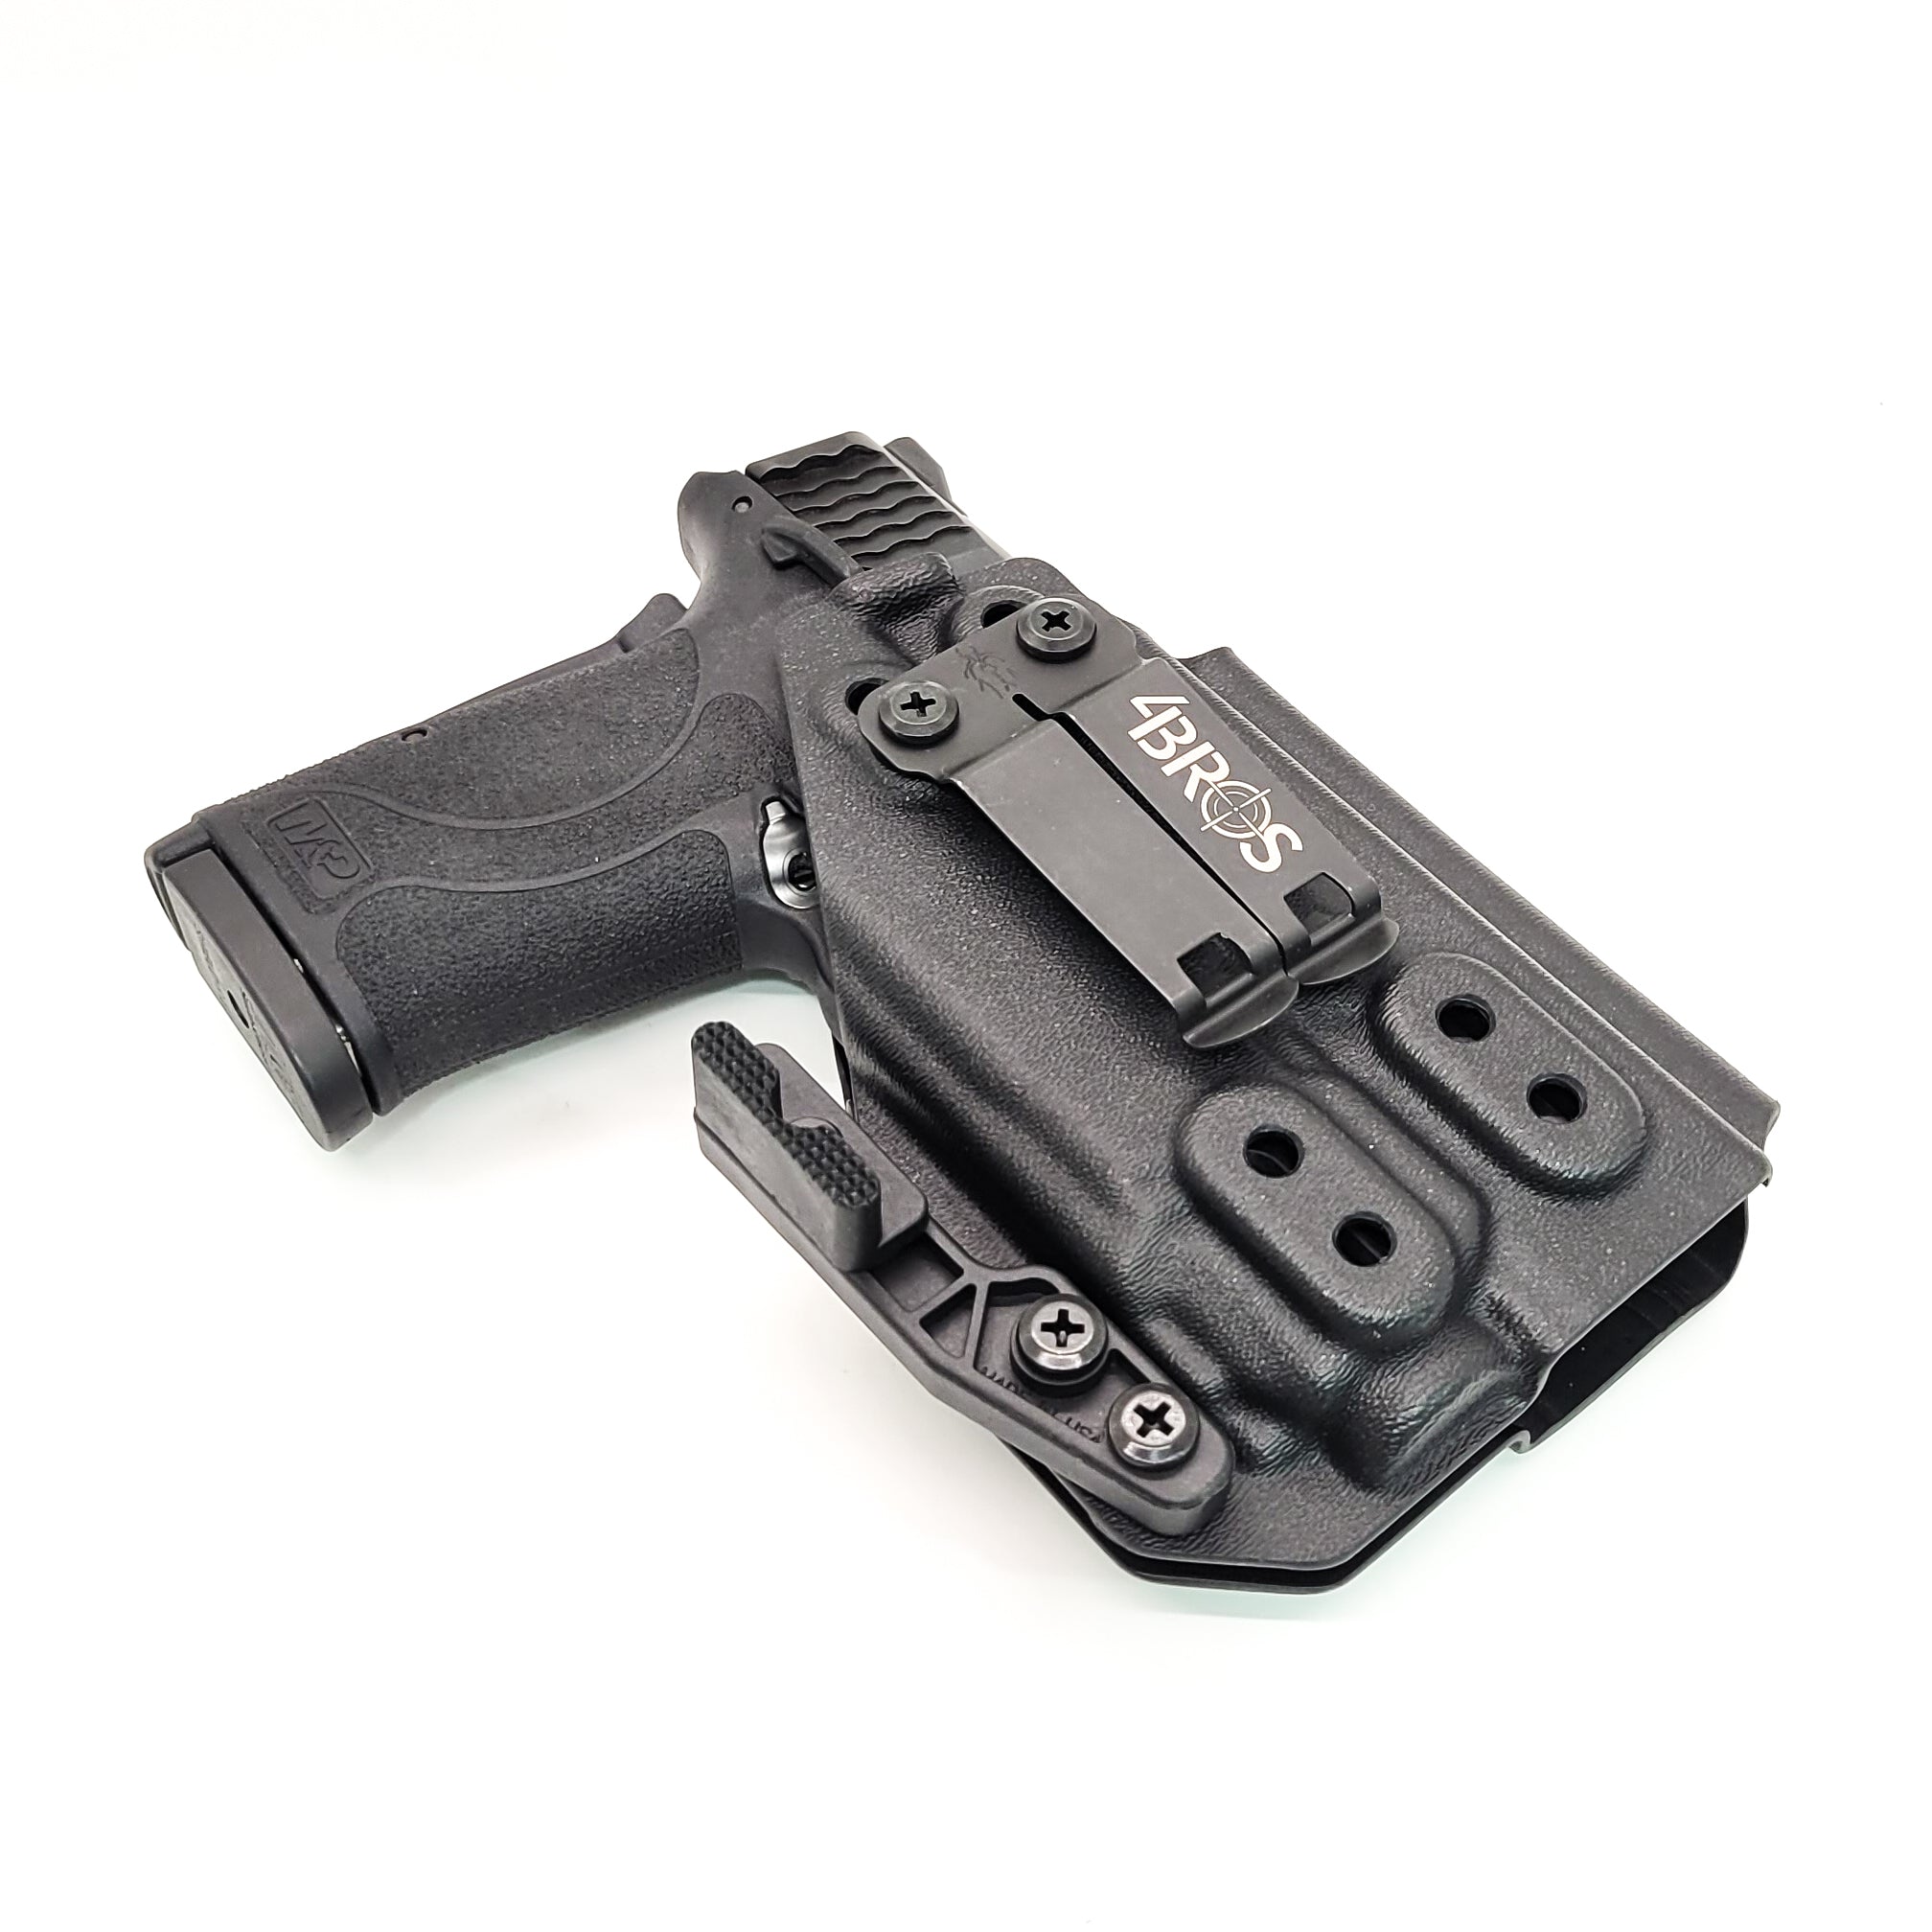 For the best Inside Waistband IWB AIWB holster designed to fit the Smith & Wesson M&P 9 Shield EZ with Streamlight TLR-8 or TLR-8A weapon-mounted light, shop 4Bros. Full Sweat guard Adjustable Retention minimal material and smooth edges to reduce printing Thermoplastic Kydex for durability 9EZ EZ9 S&W Easy 9 TLR8 TLR8A